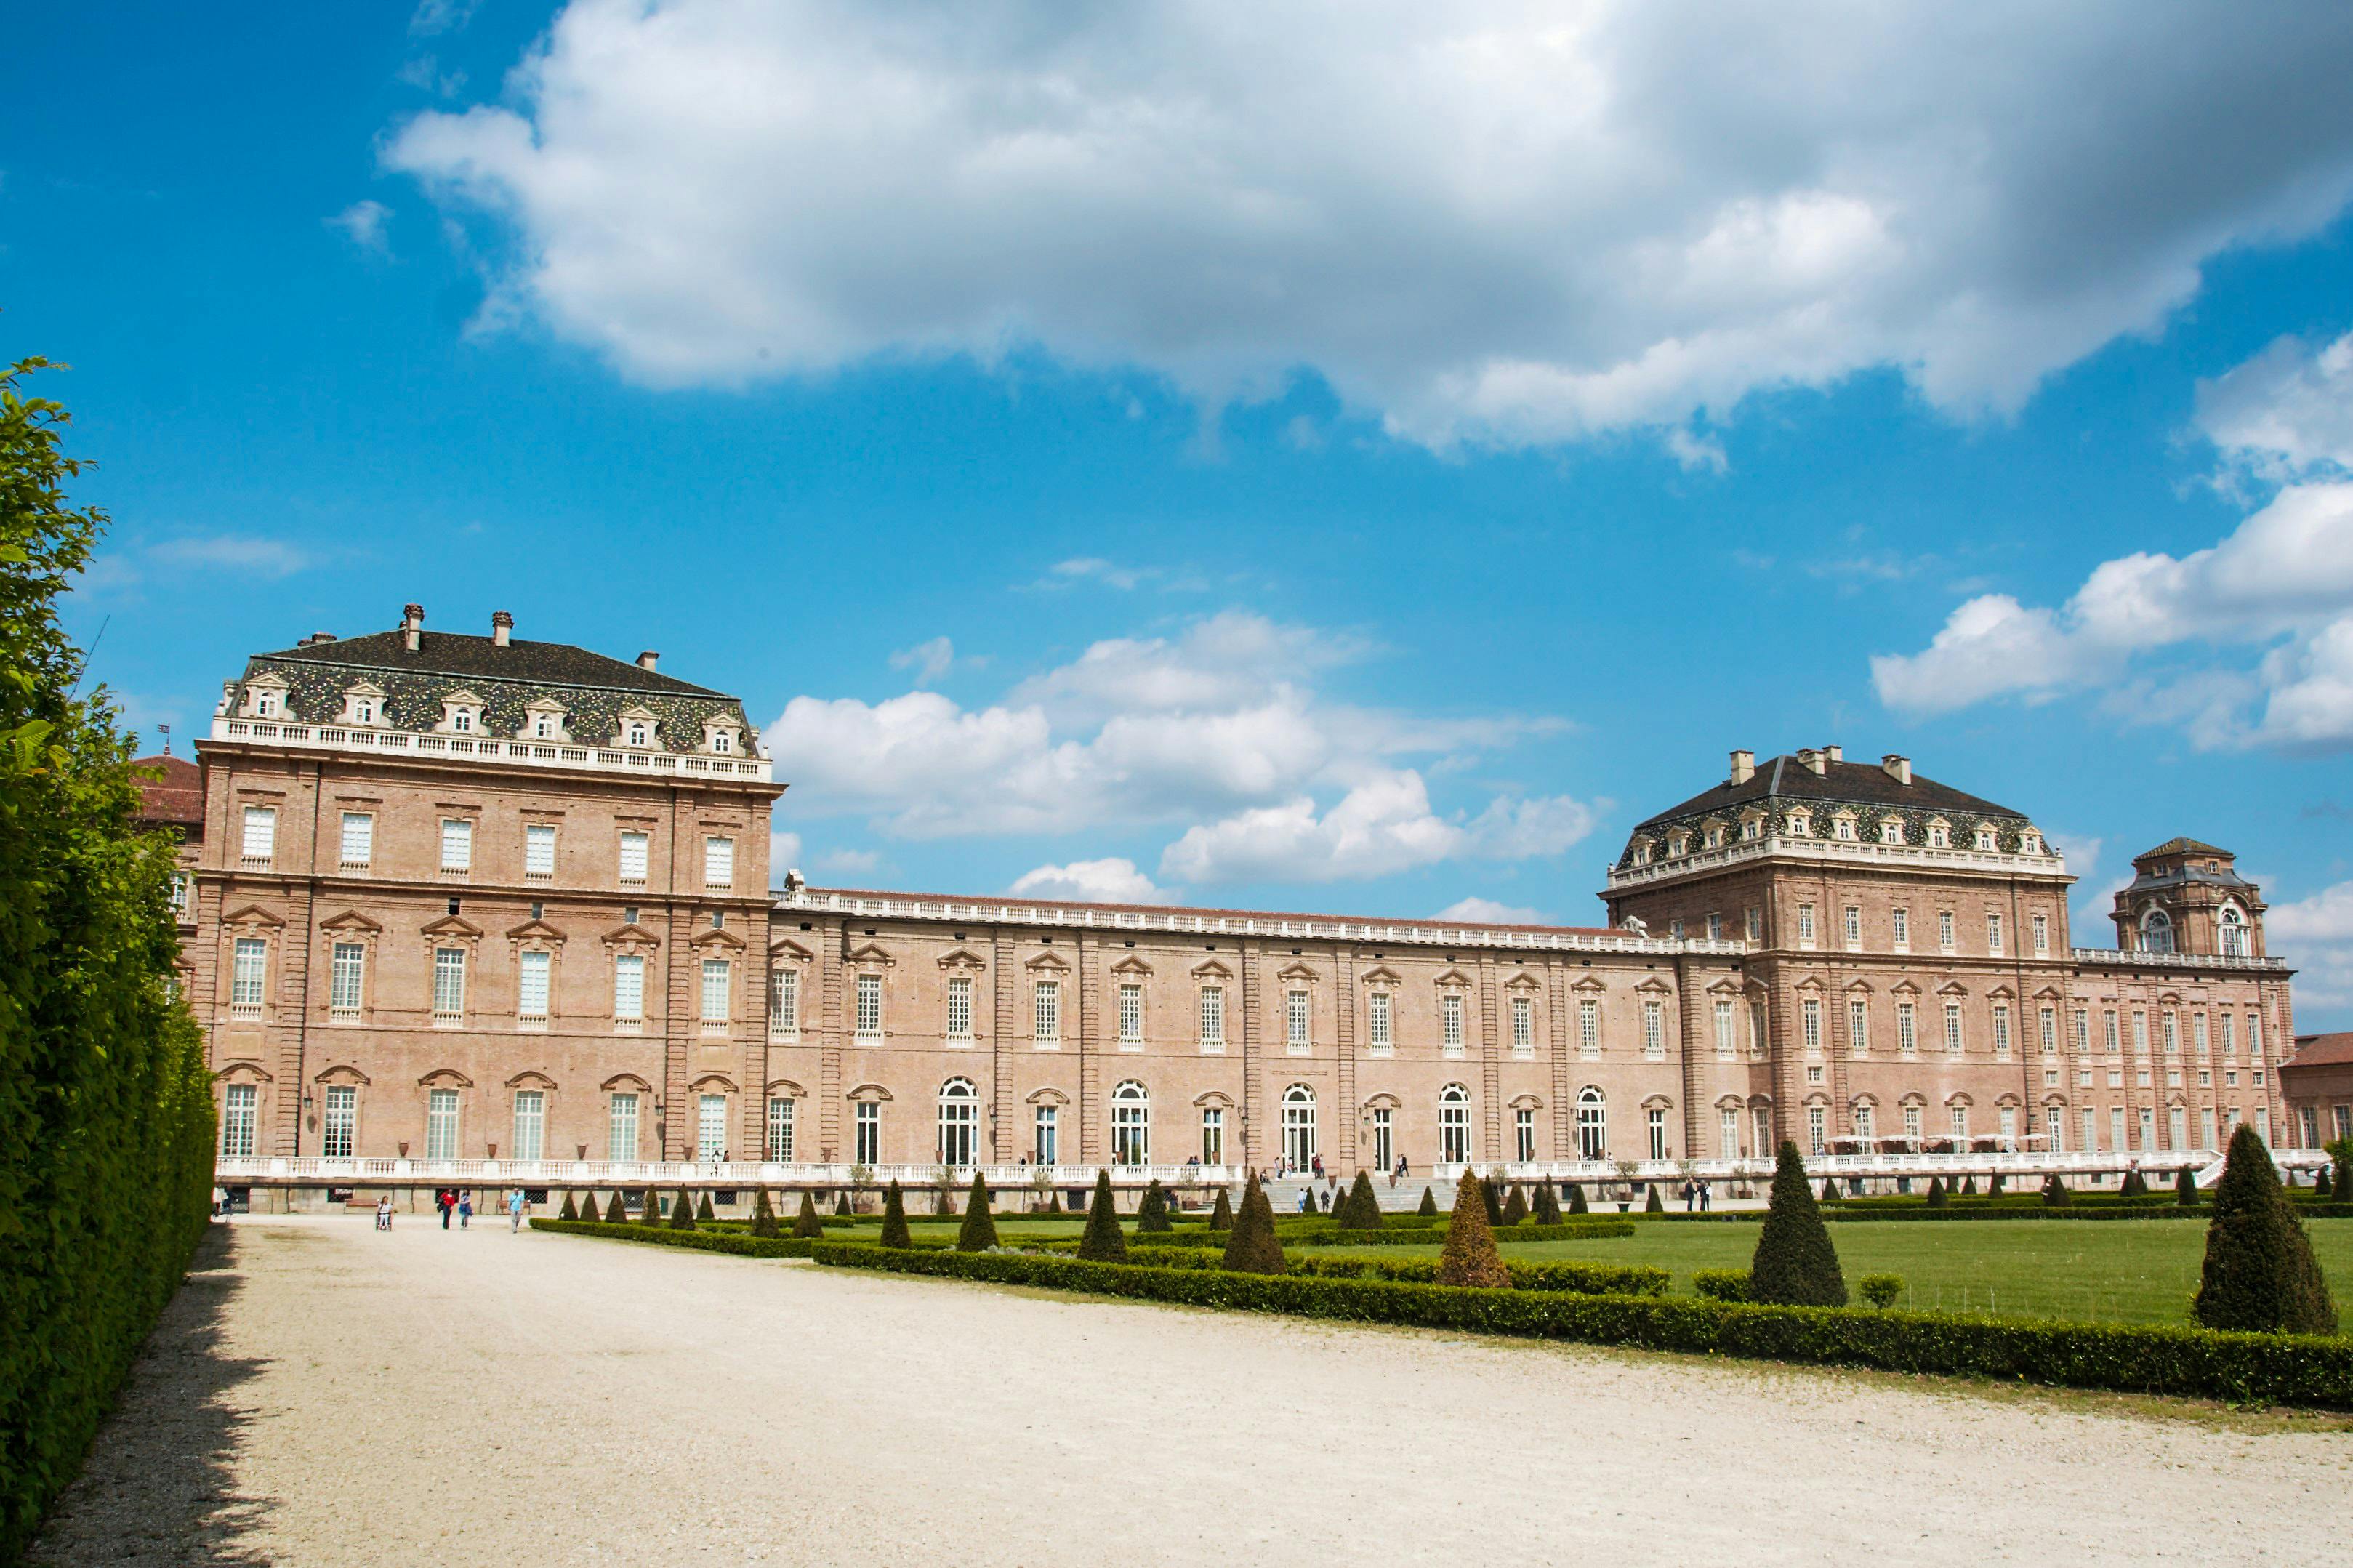 The BEST Venaria Reale Museums & exhibitions 2023 - FREE